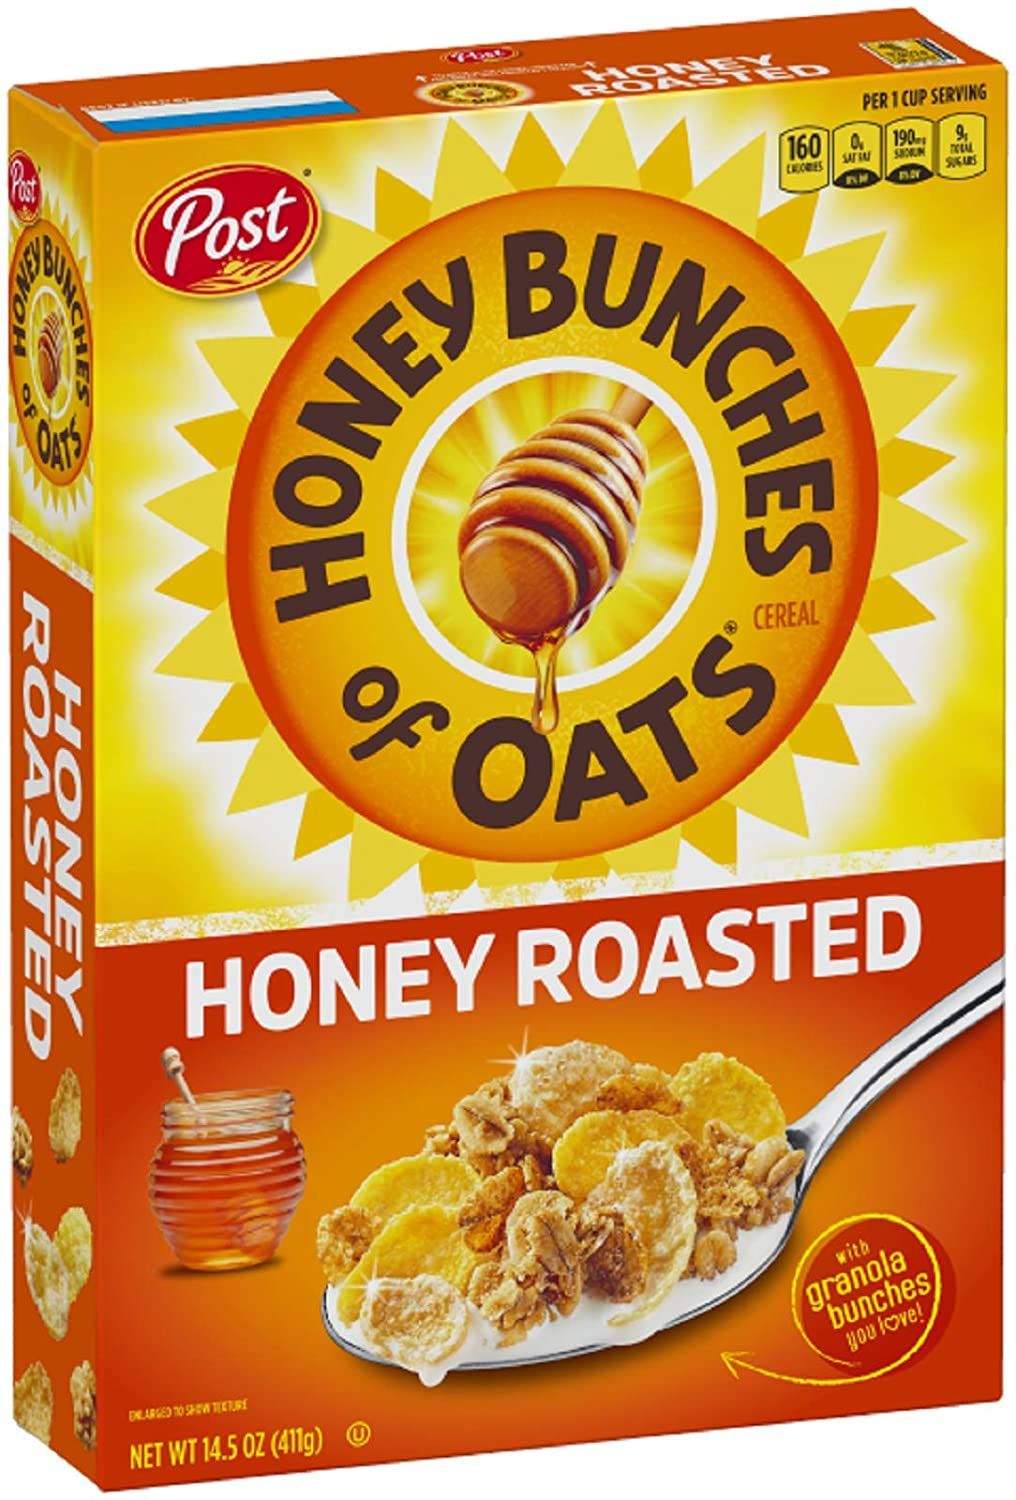 Post Honey Bunches of Oats Crunchy Honey Roasted Image